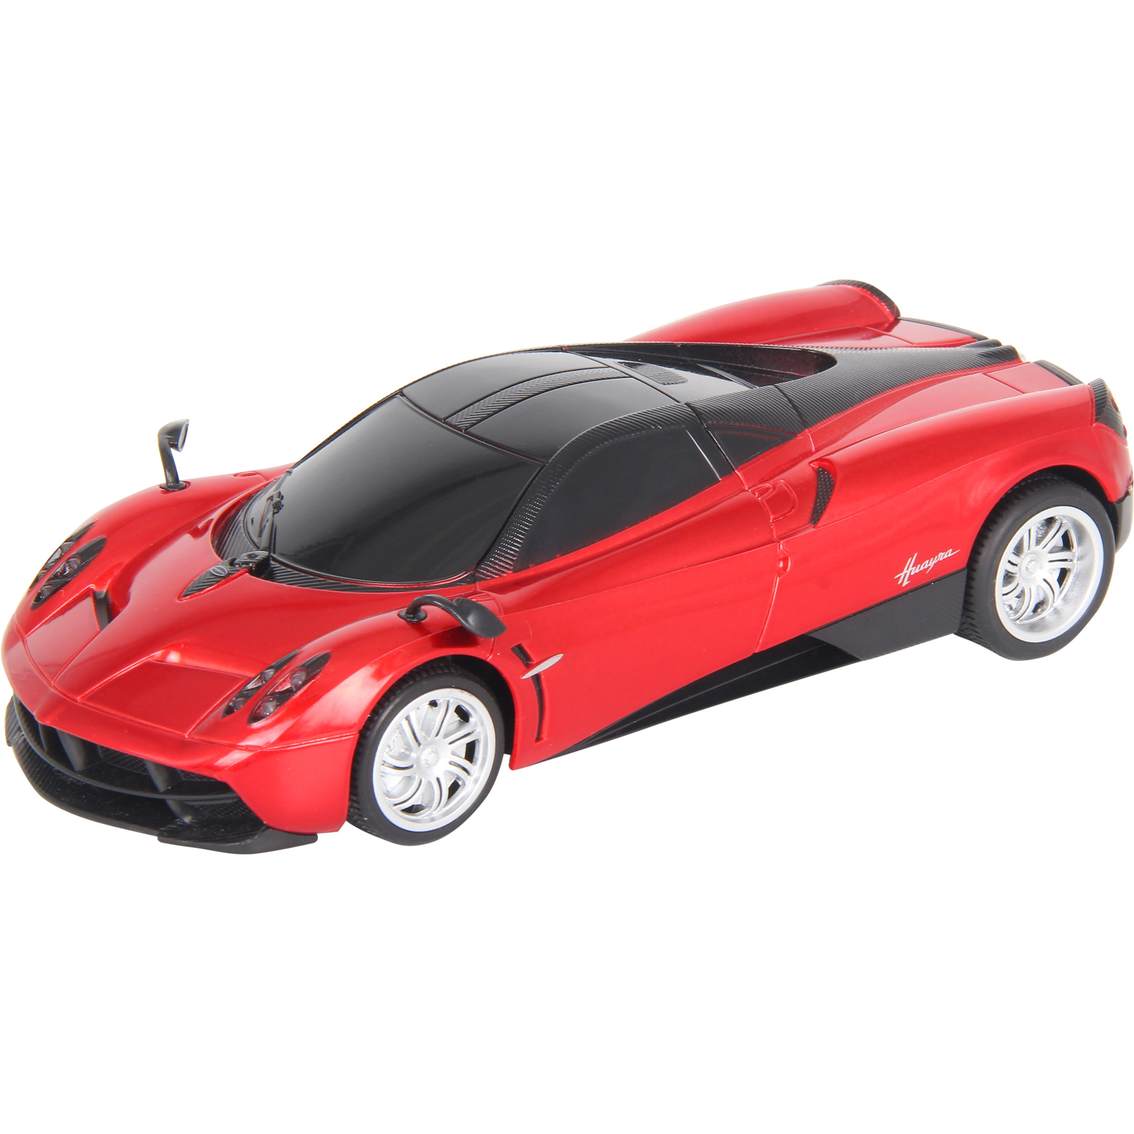 Braha 1:24 Scale Licensed RC Car - Image 6 of 10